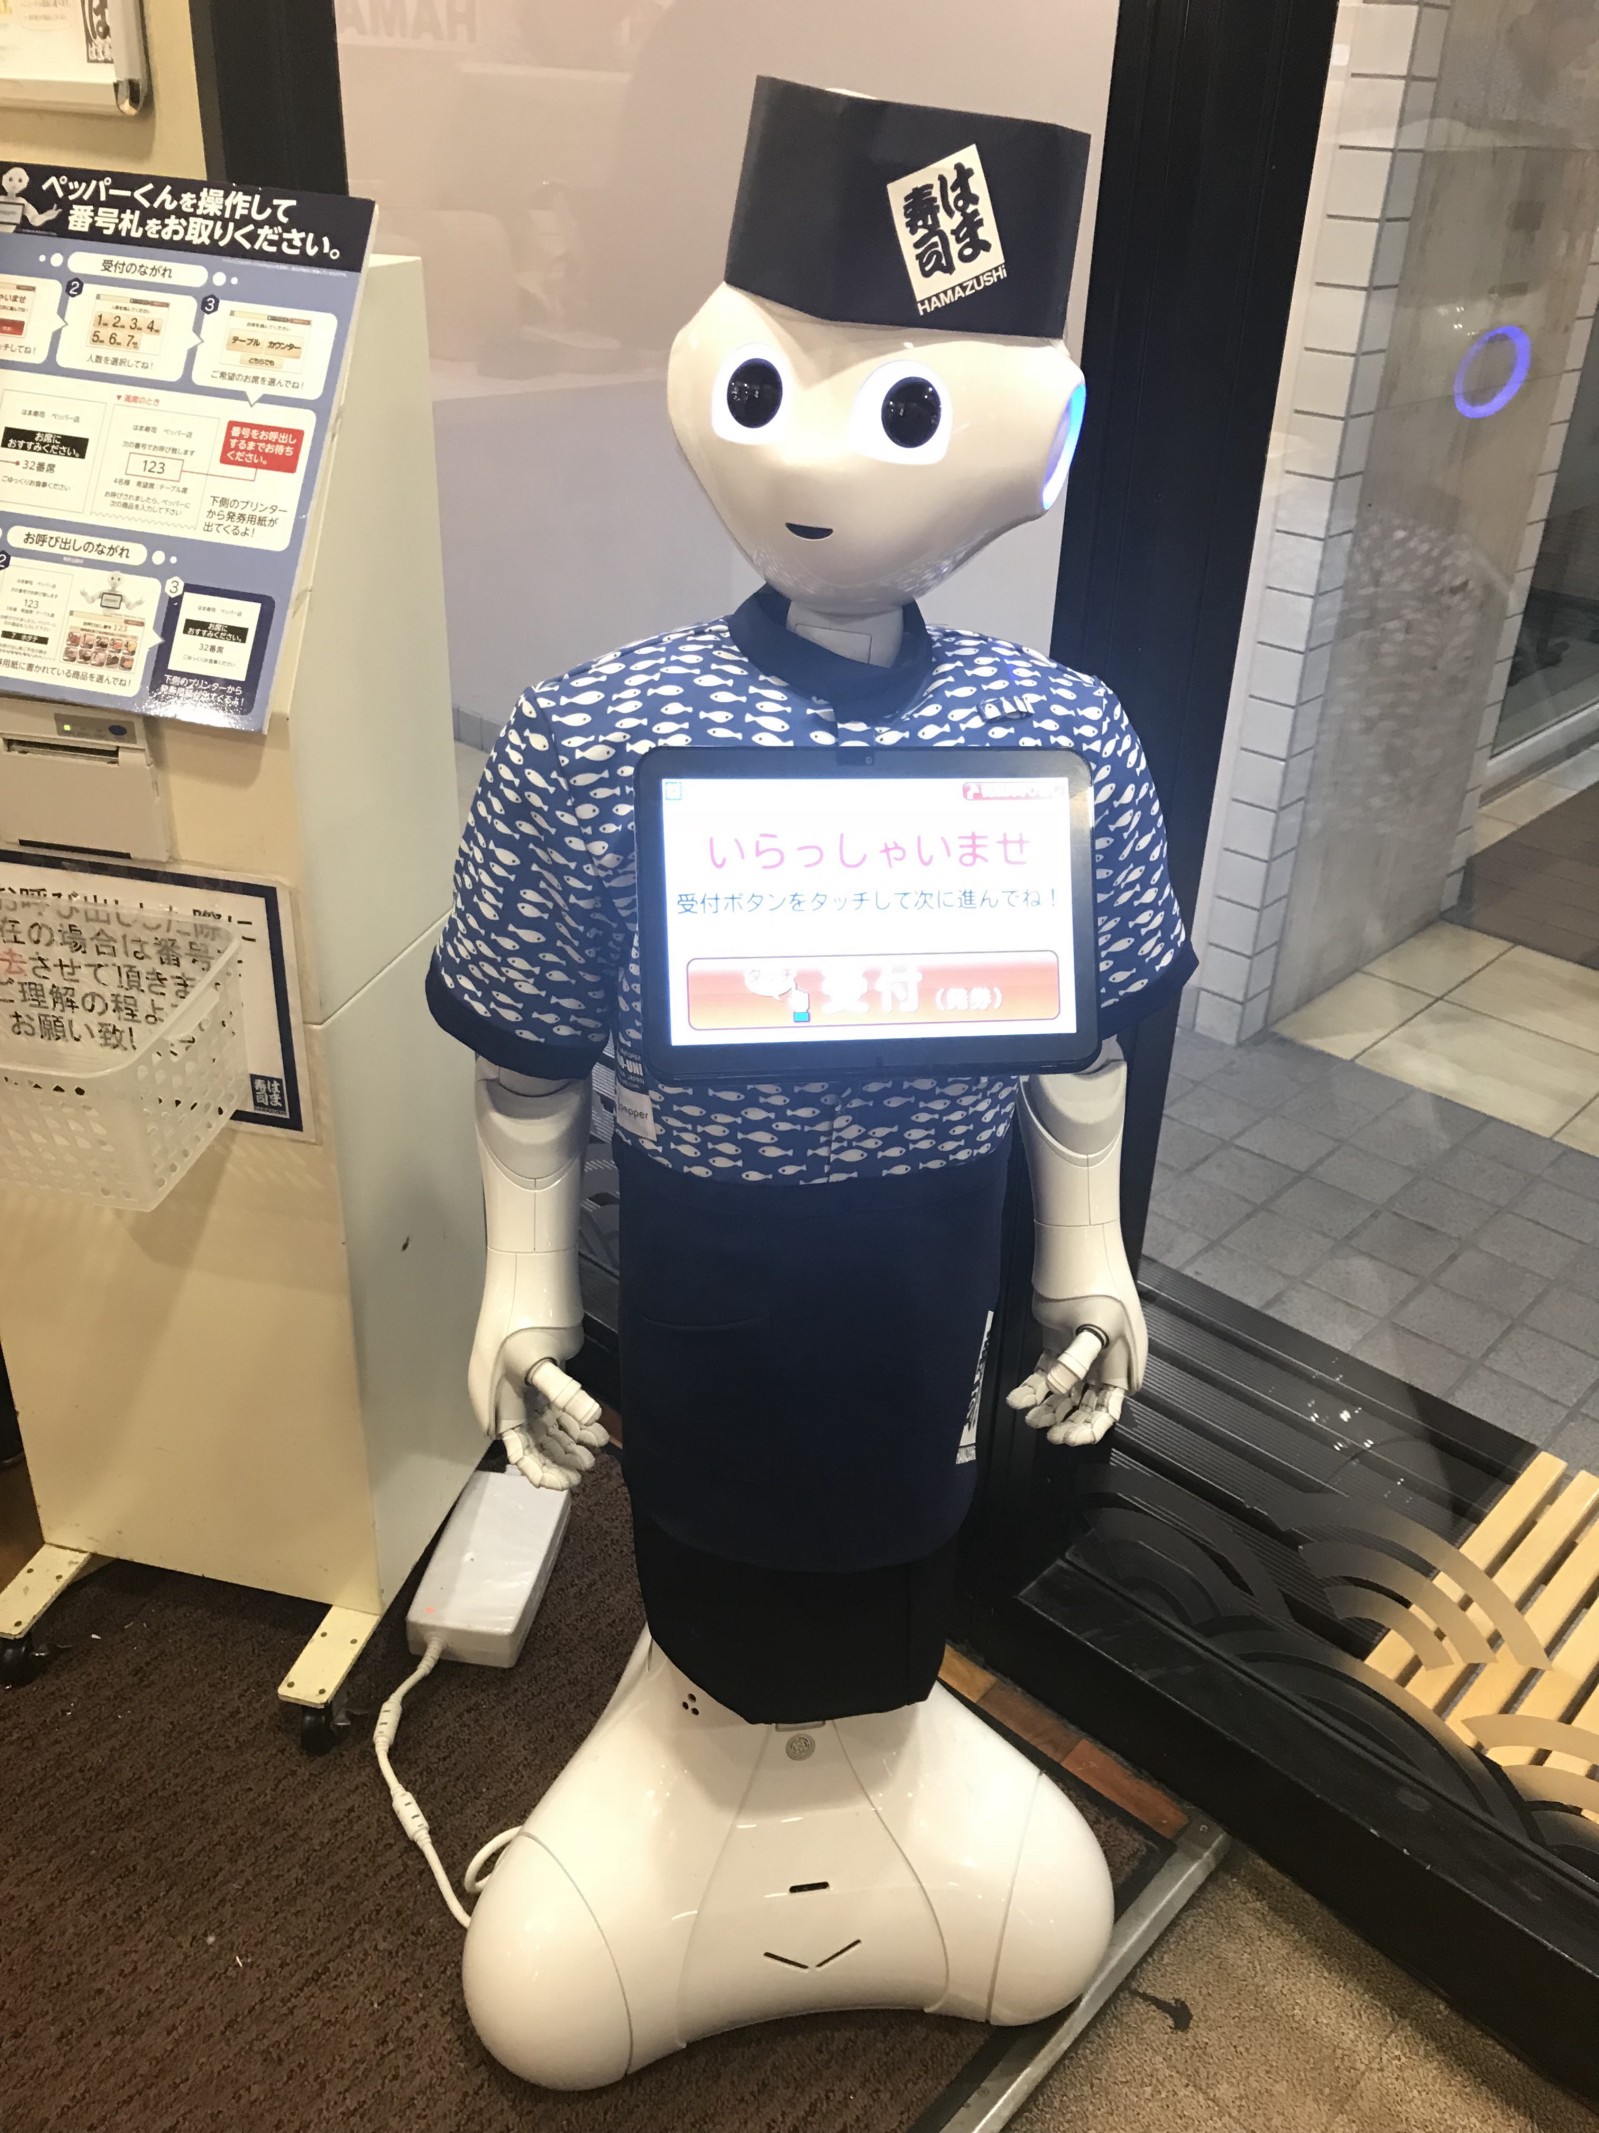 The robot "Pepper" greeting customers